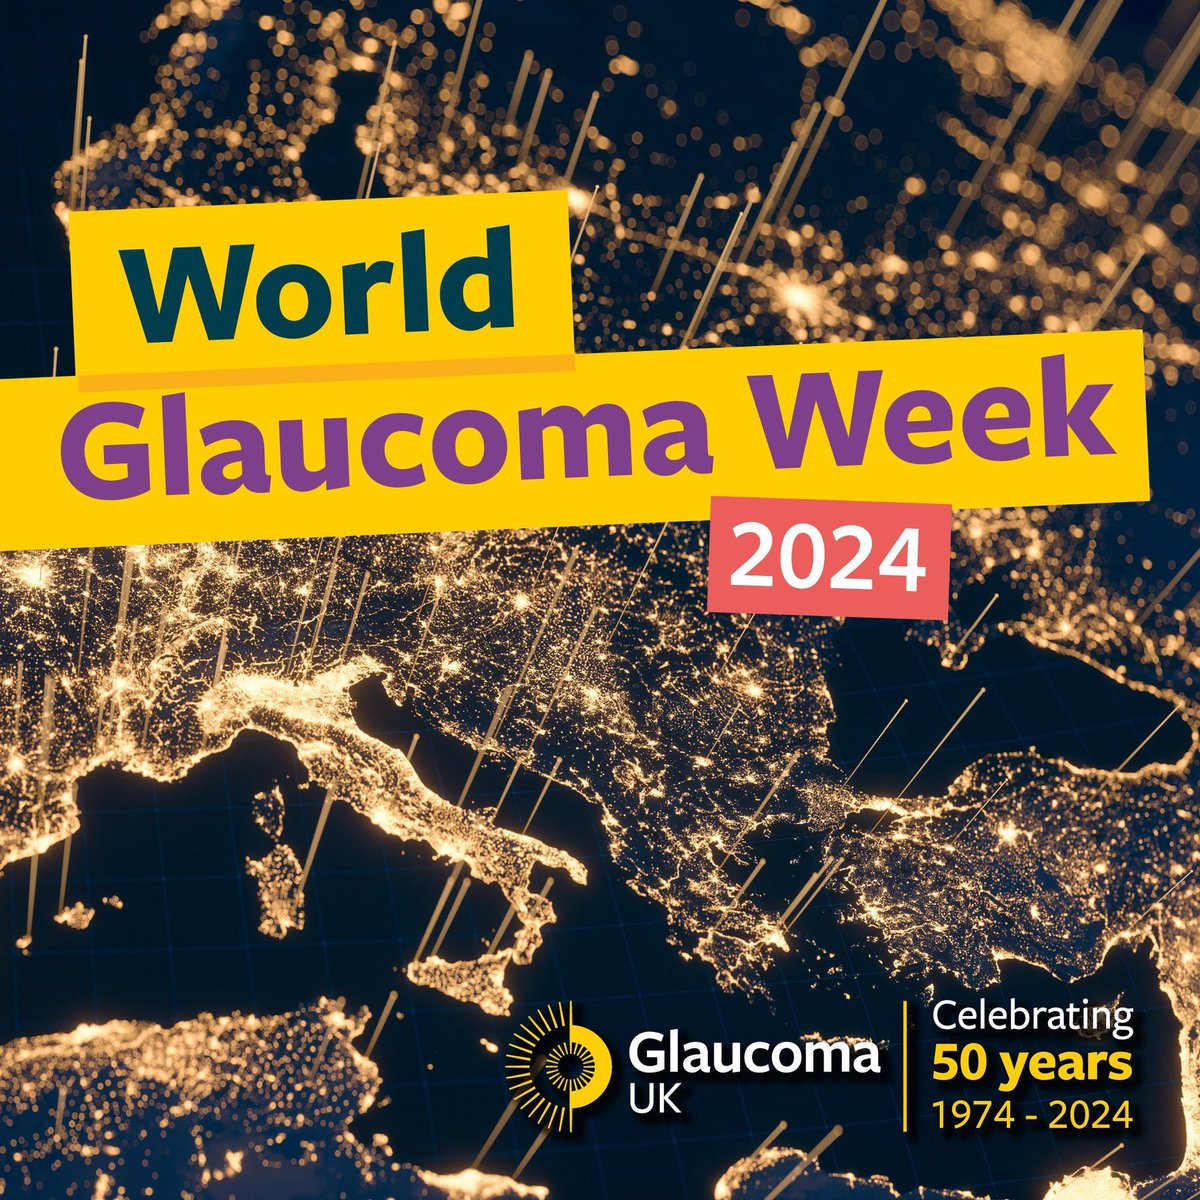 It's World Glaucoma Week 2024 - let’s raise awareness and encourage regular eye check ups to protect our sight. #WorldGlaucomaDay #protectYourvision #WorldGlaucomaWeek #EyeHealth